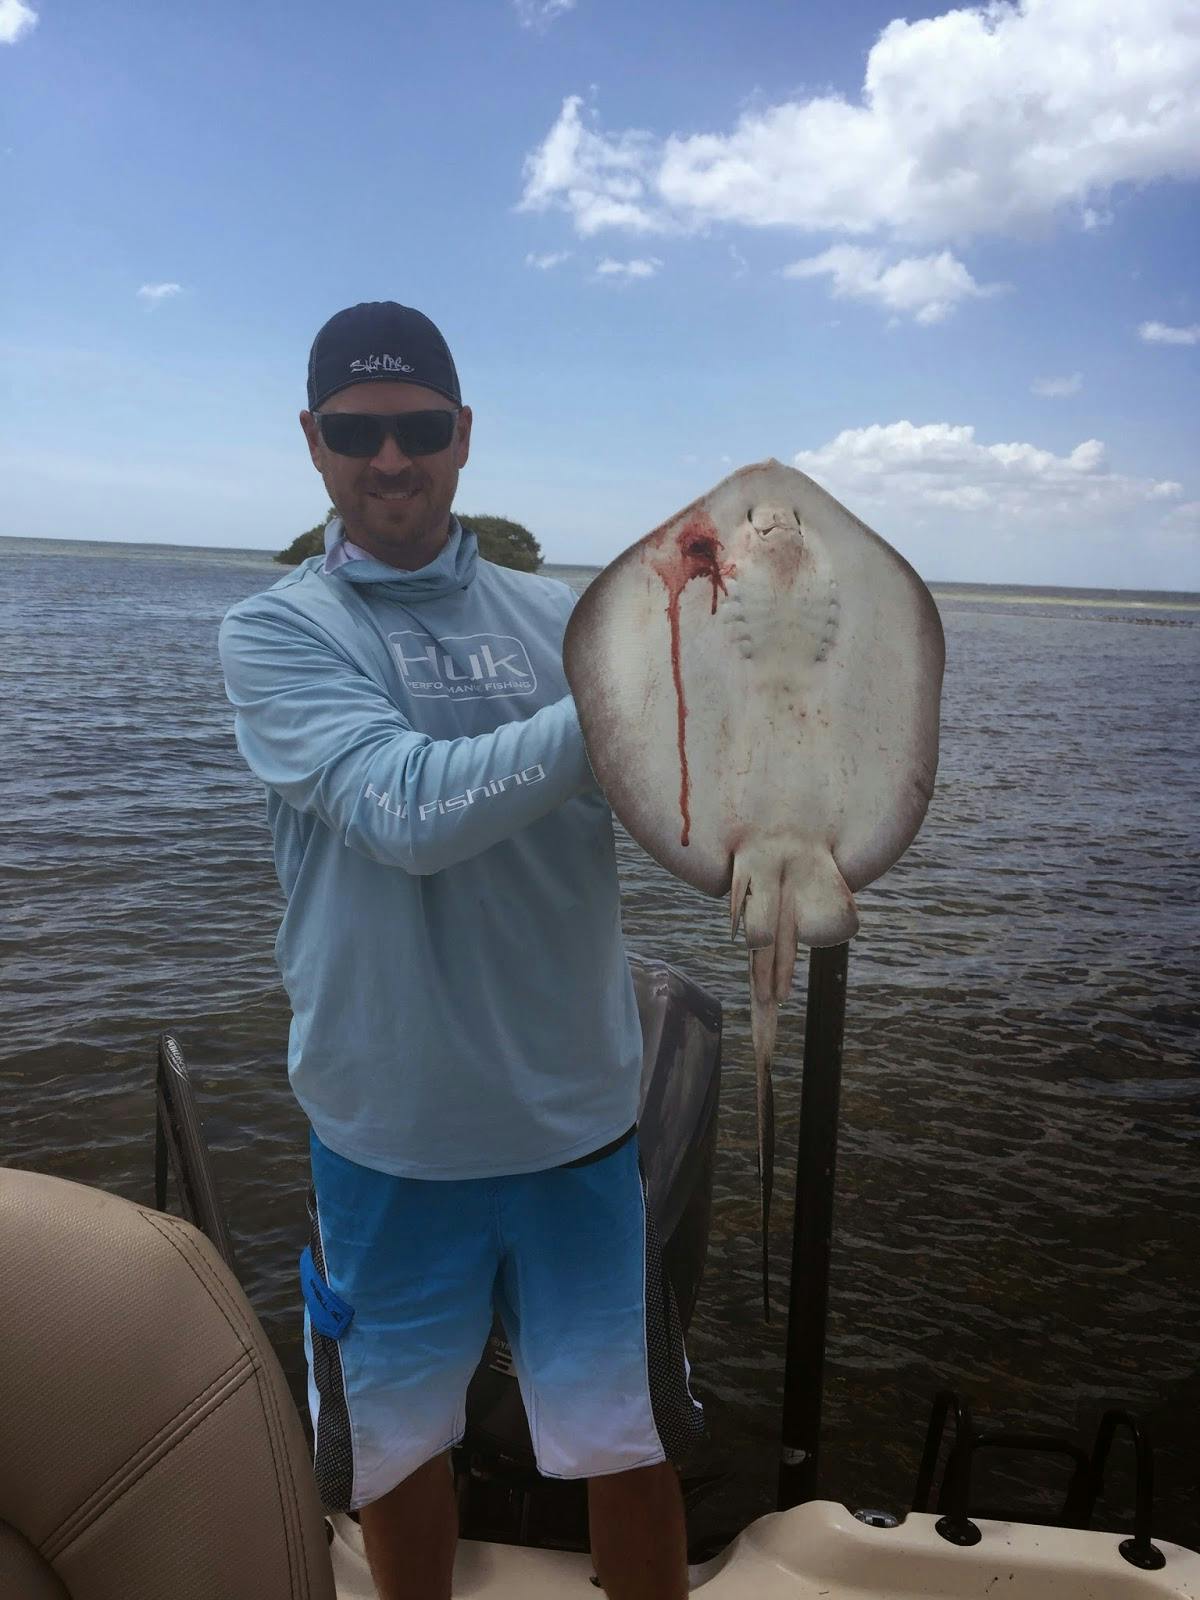 Shore fishers on Hilton Head pull up stingrays, strong feelings